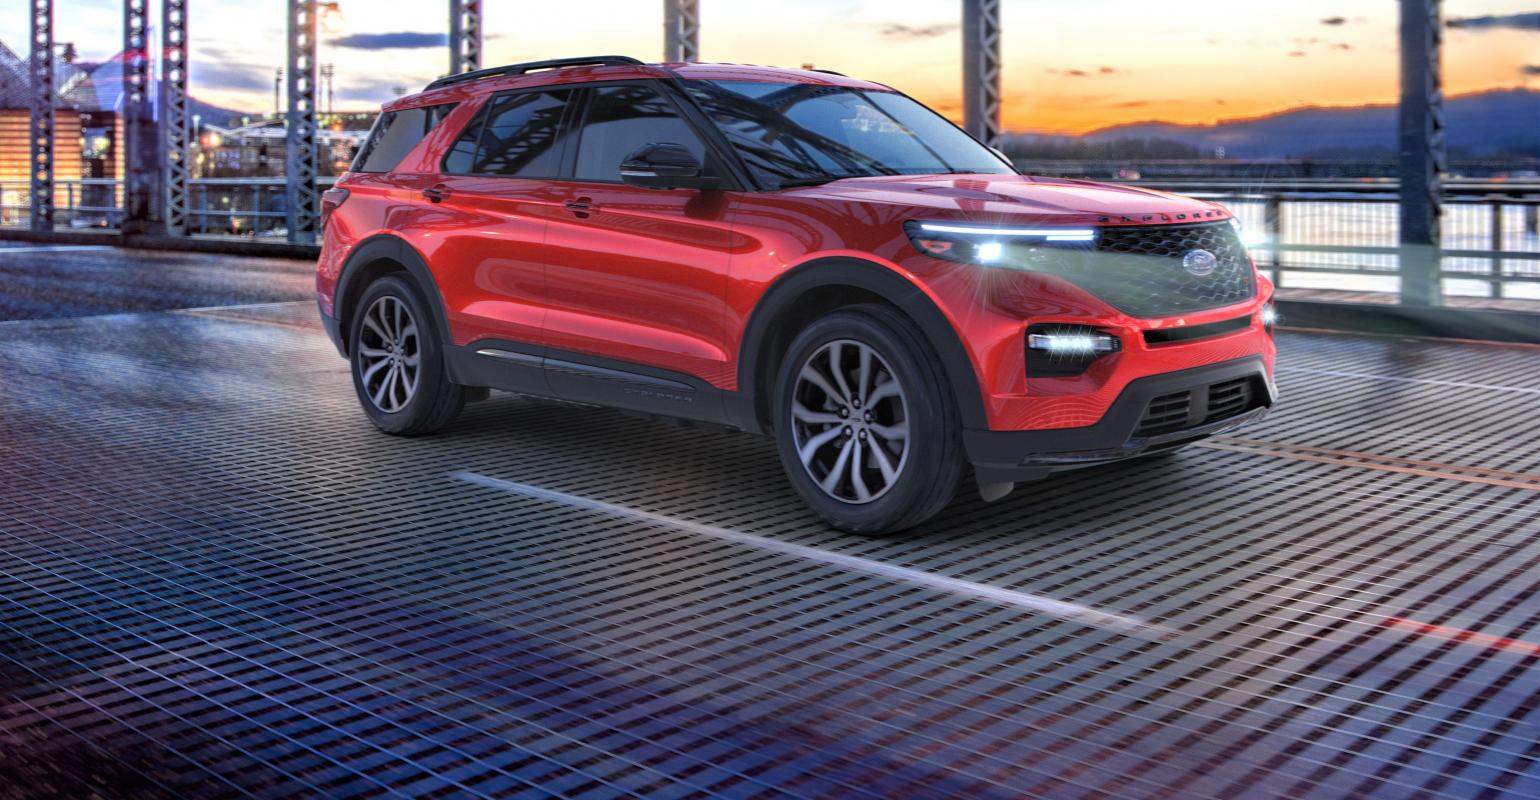 Ford Adds Three Models to Explorer Lineup for 2021 | WardsAuto